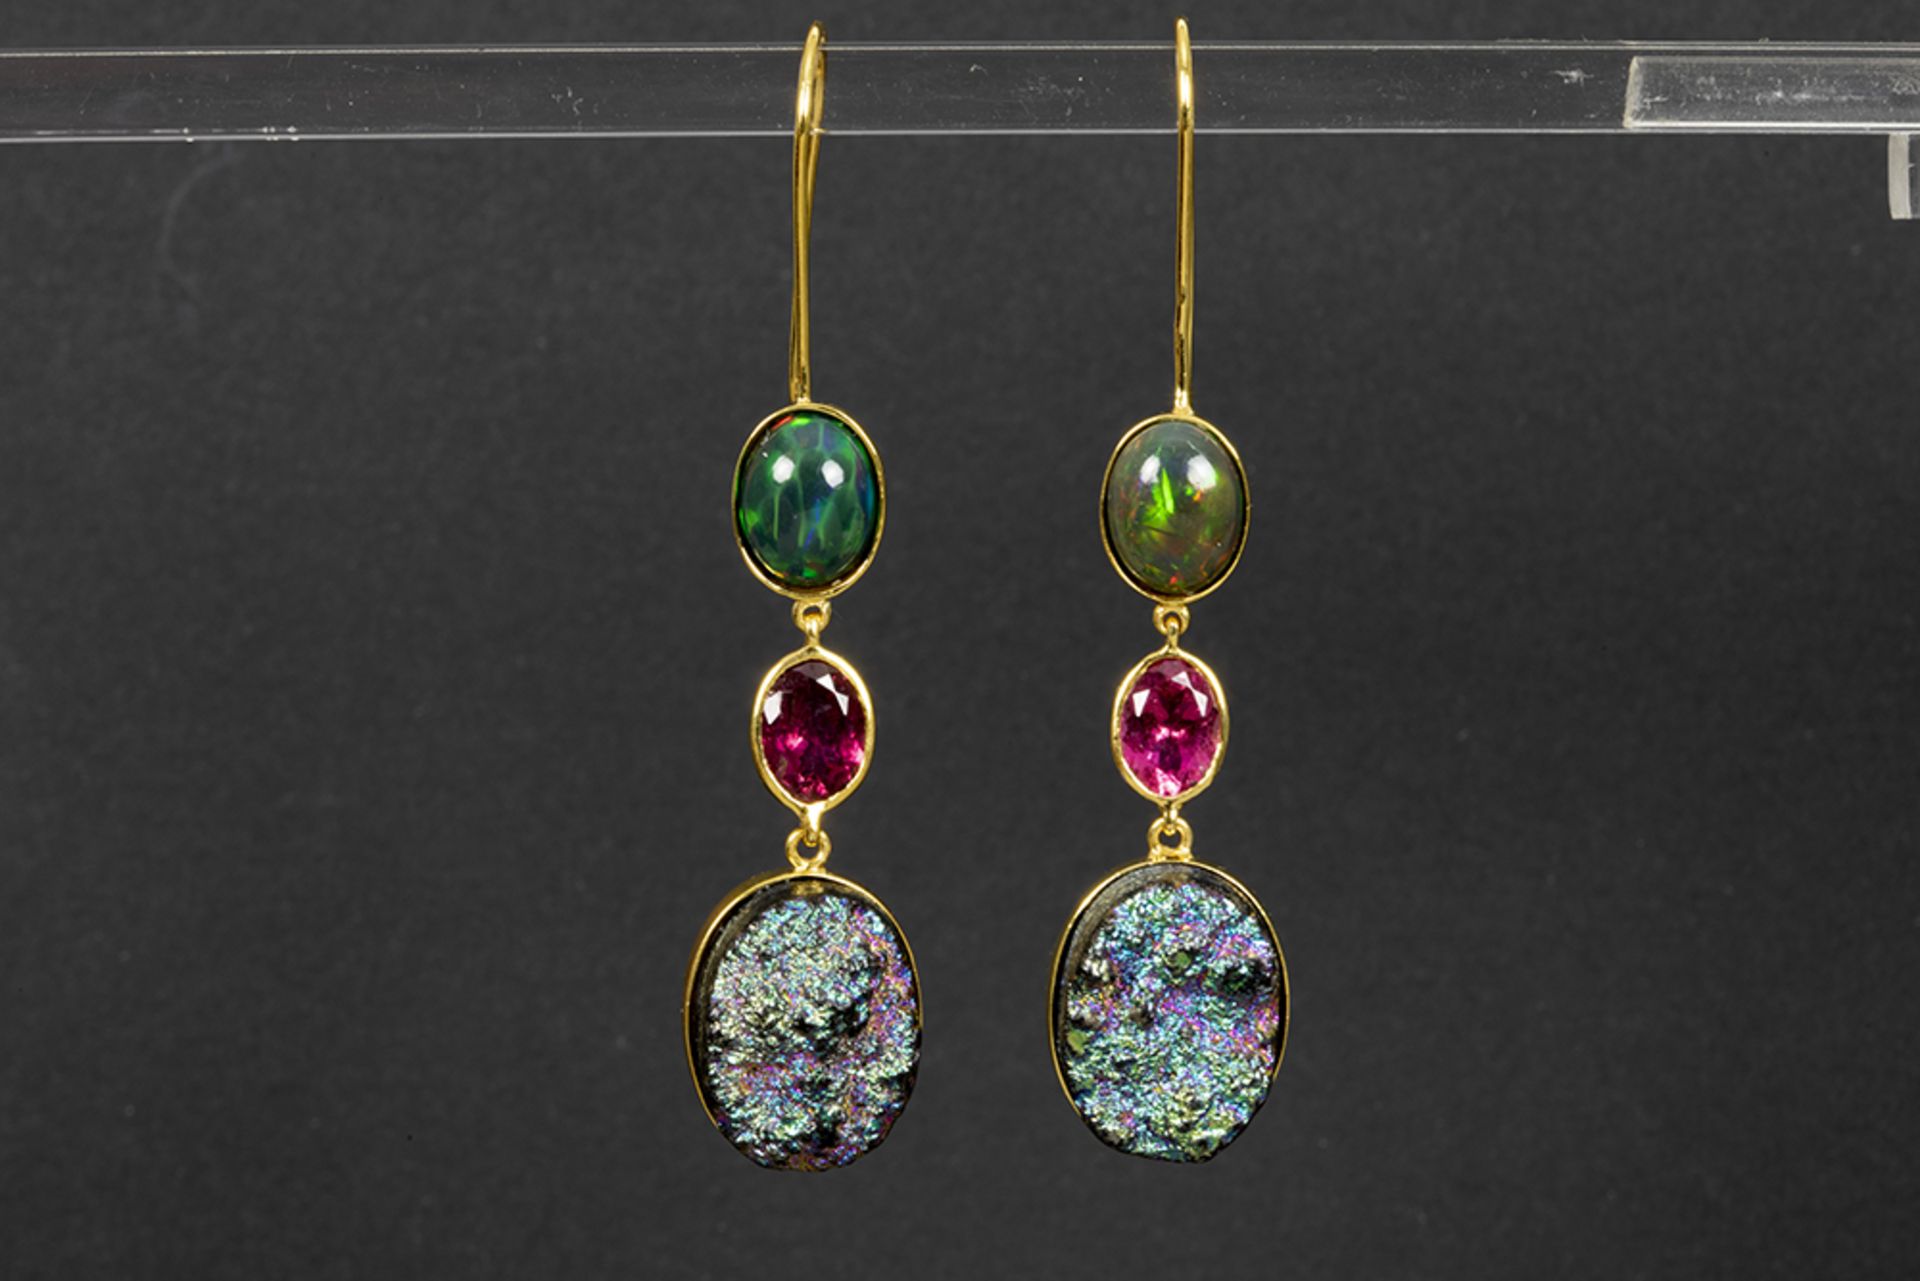 pair of earrings in yellow gold (18 carat) with ca 30 carat of opals and tourmaline || Paar modieuze